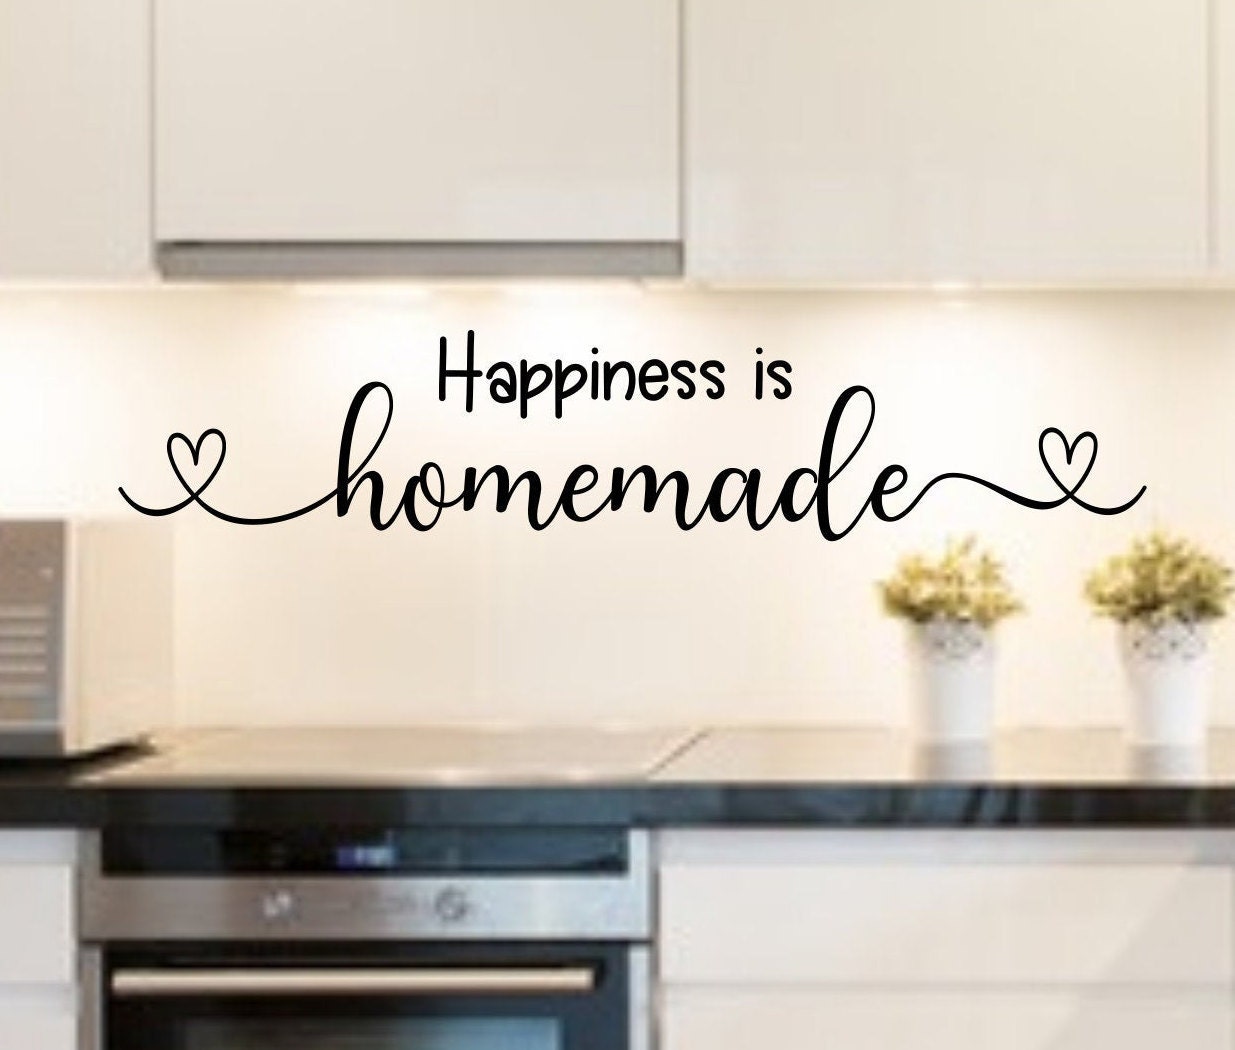 Kitchen Quotes and Memes That Made Us Smile